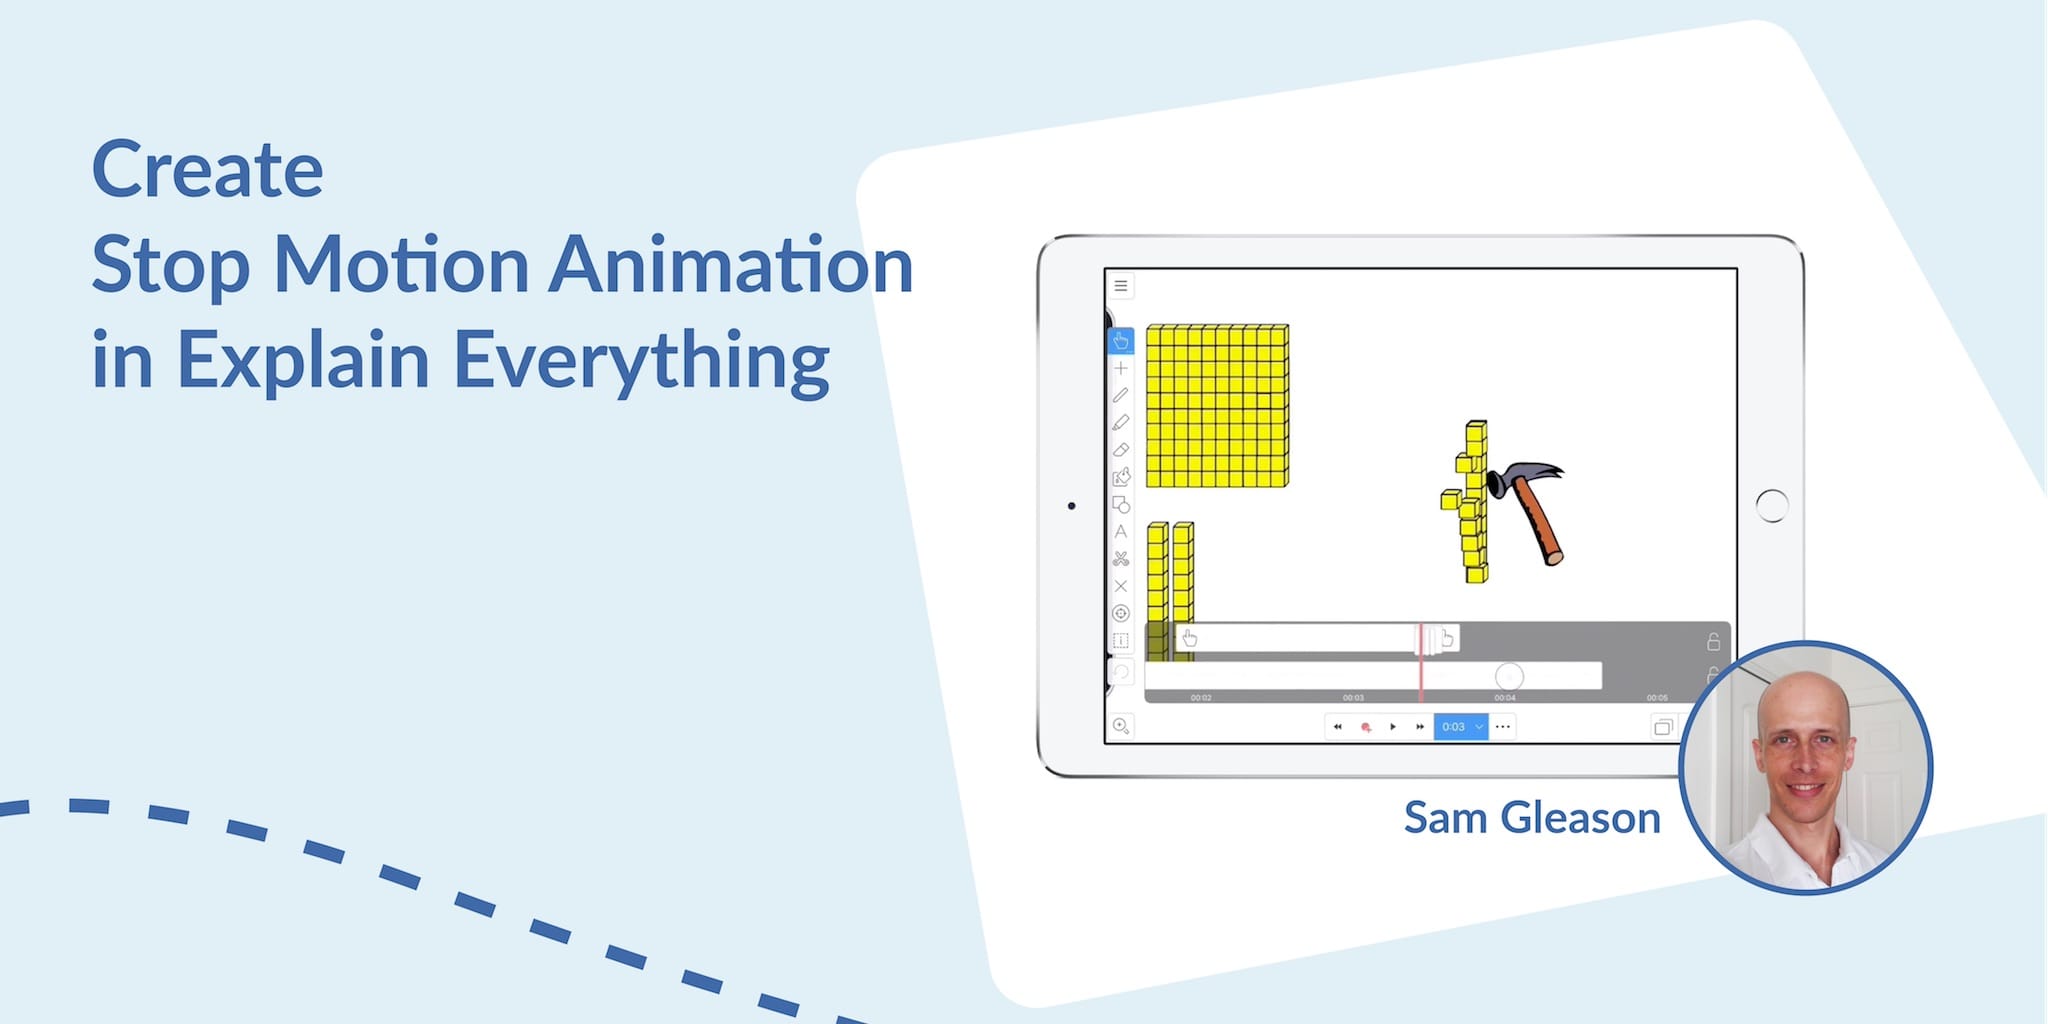 Create stop motion animation